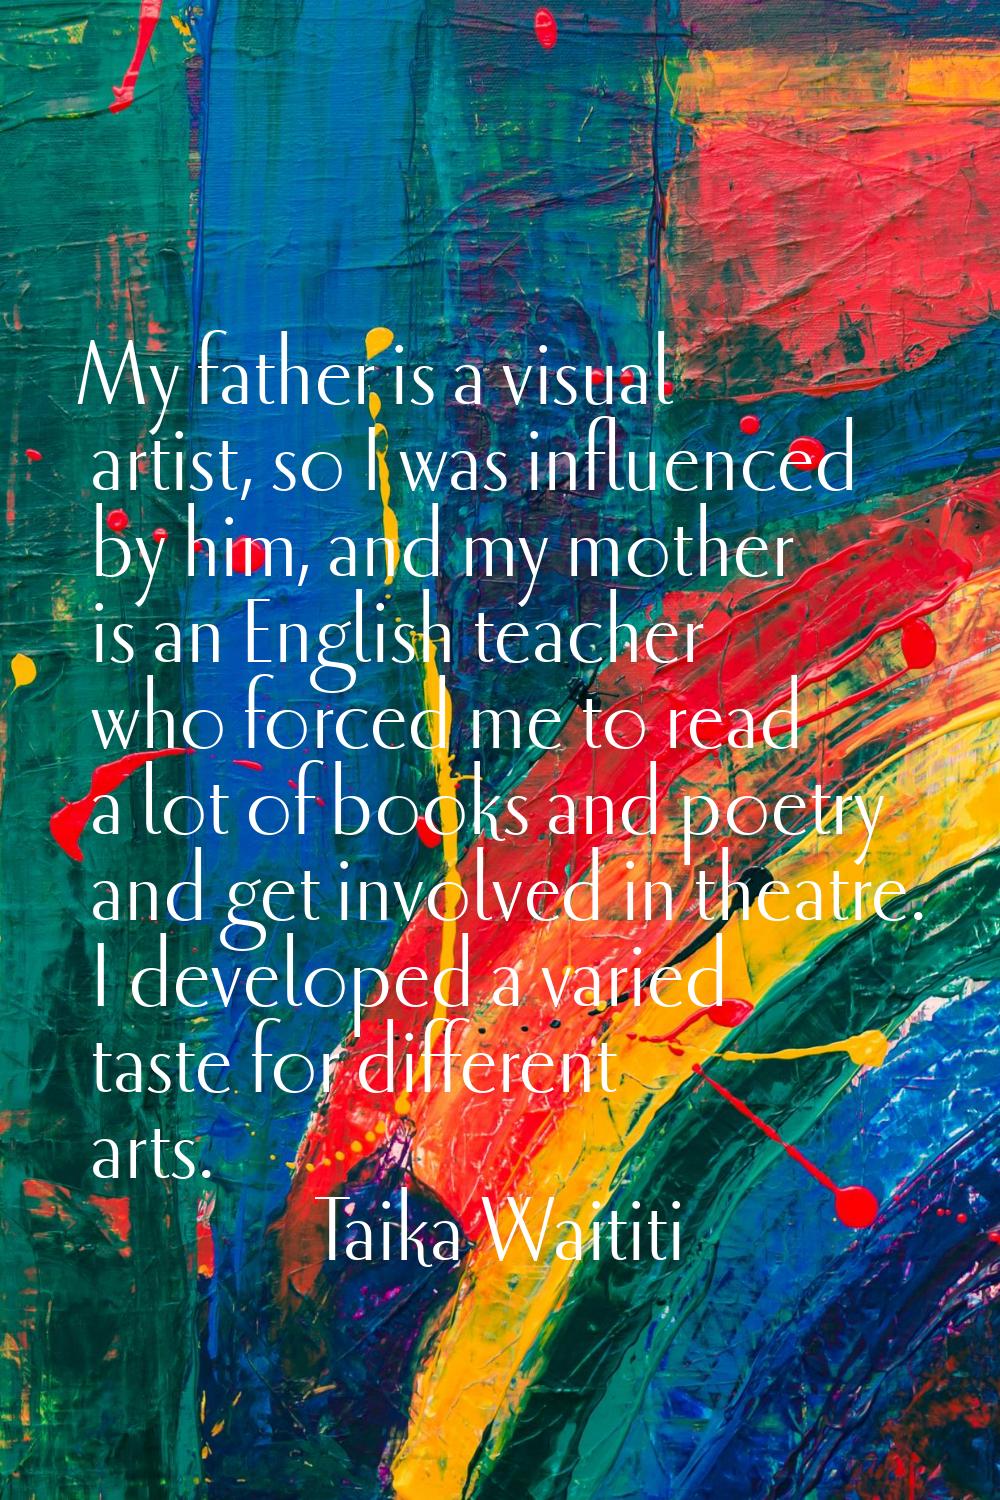 My father is a visual artist, so I was influenced by him, and my mother is an English teacher who f